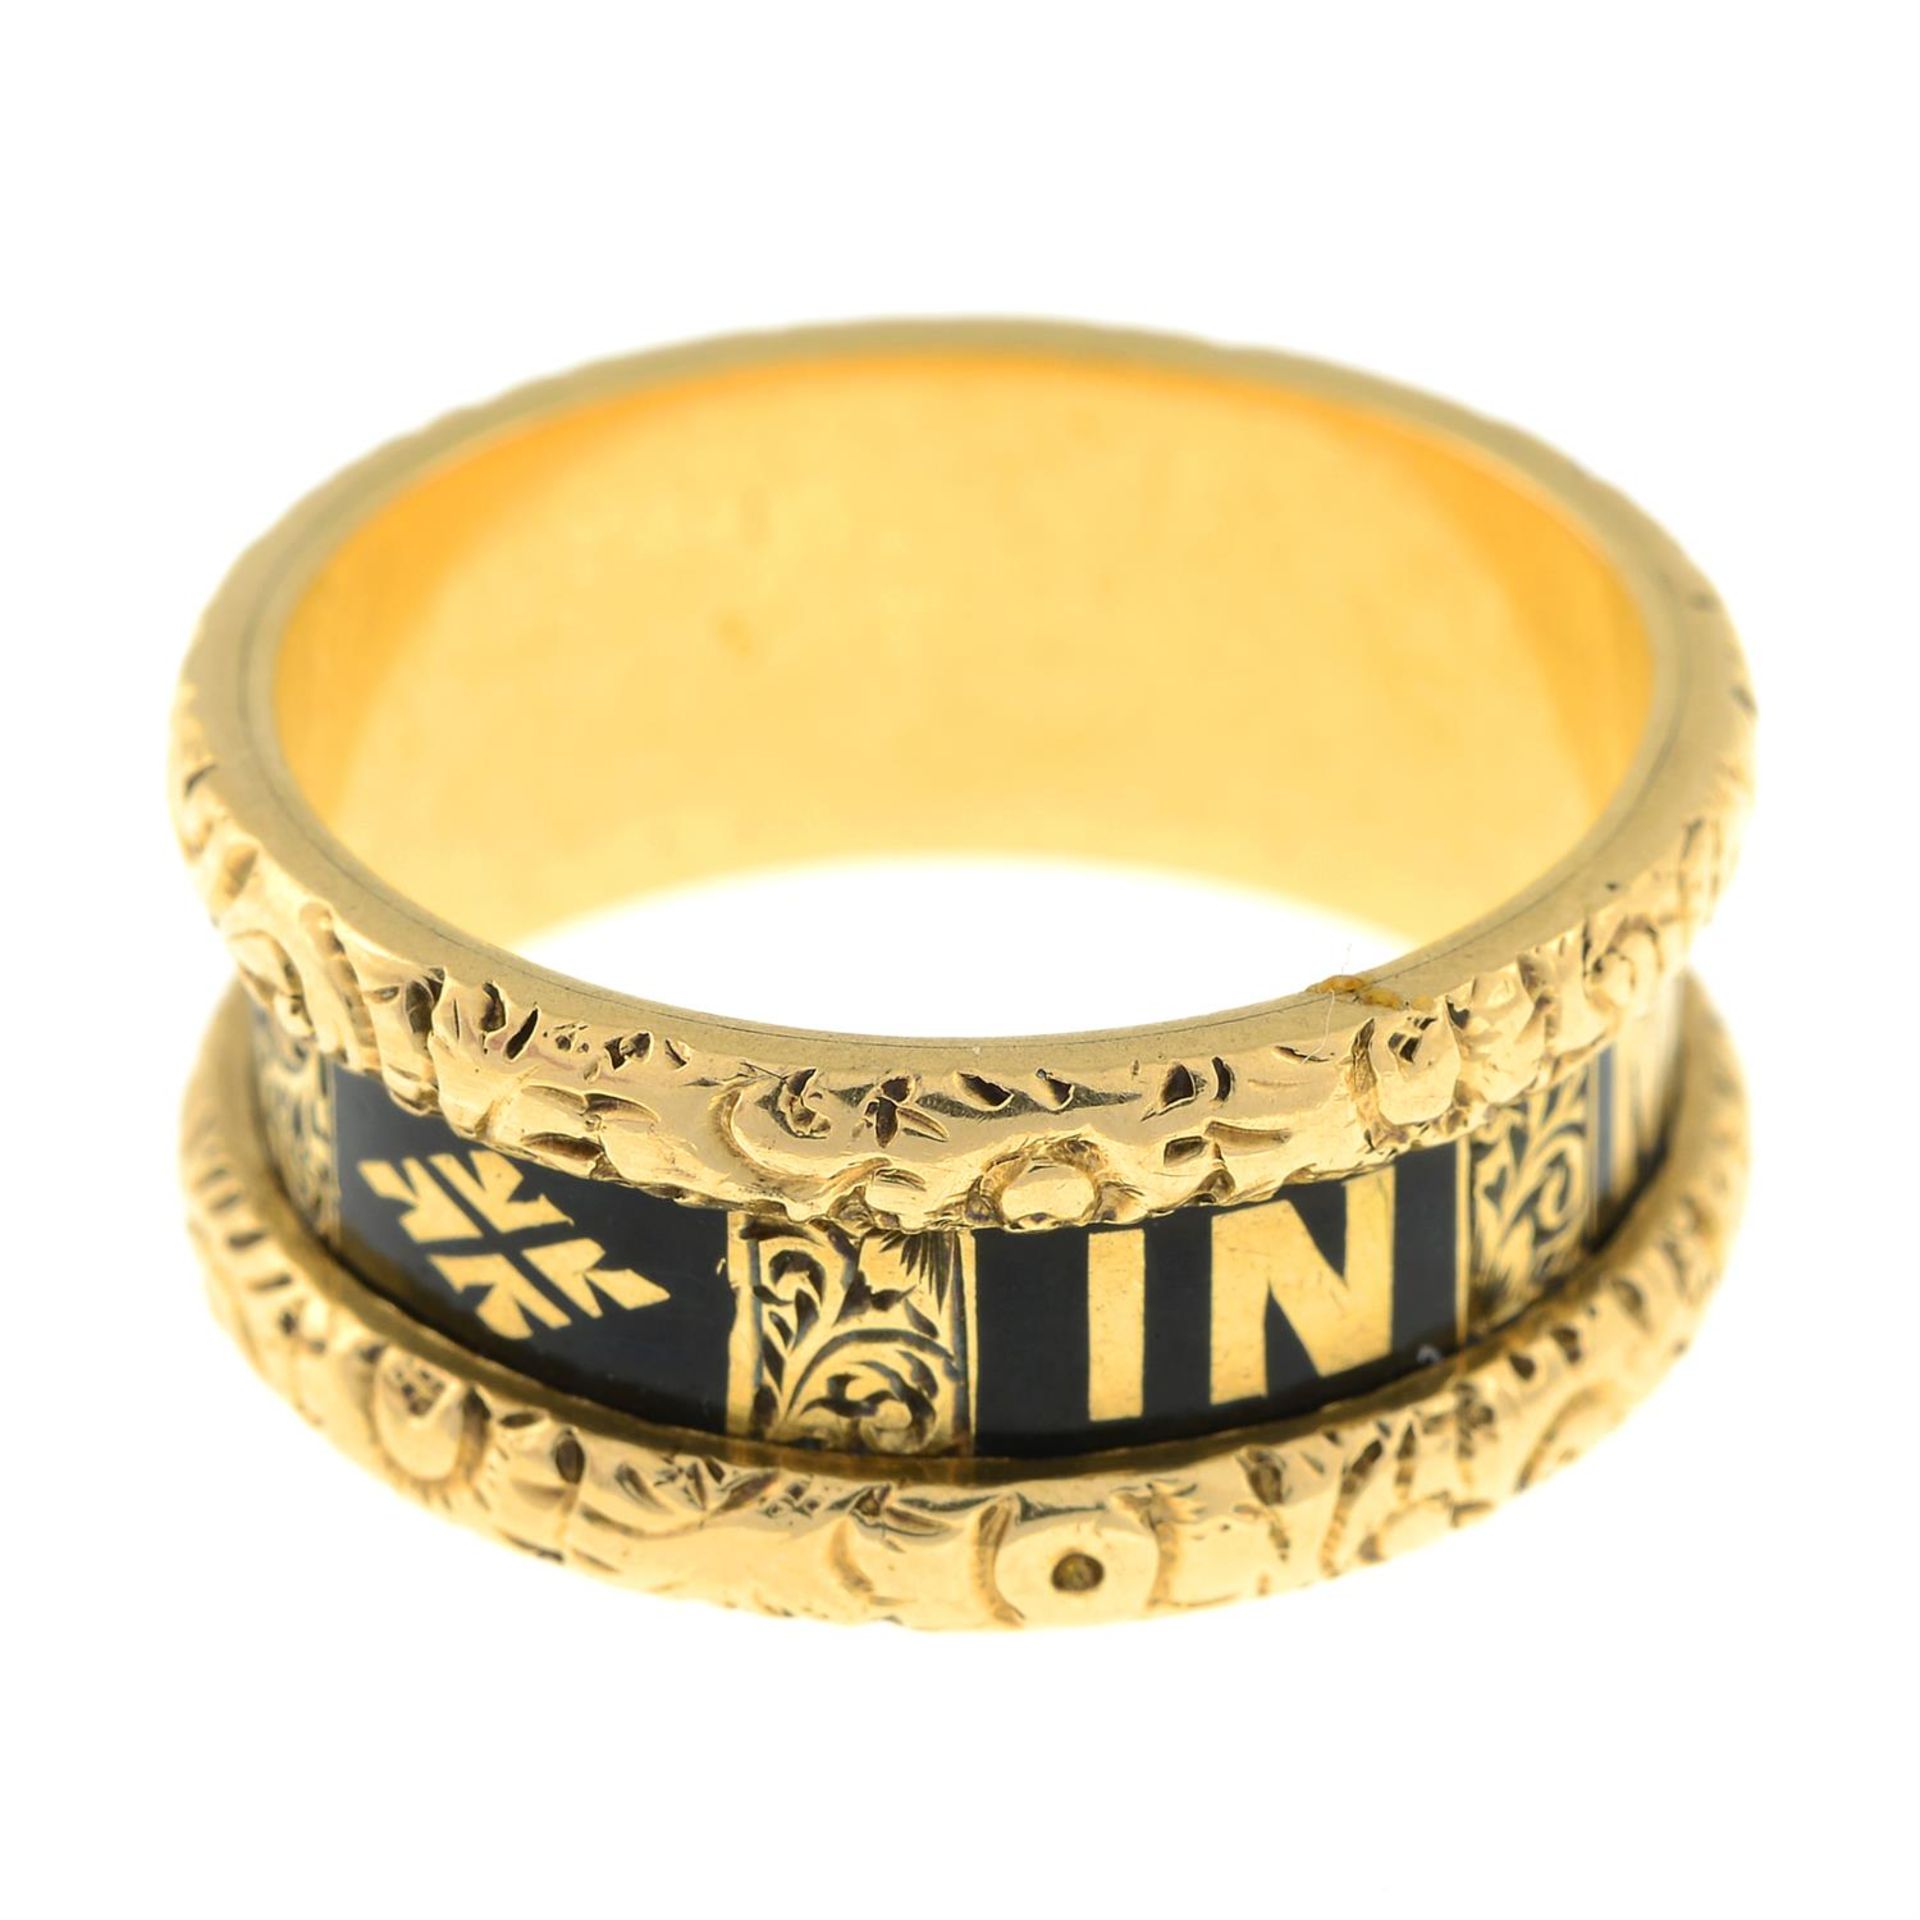 A late Victorian 18ct gold mourning ring, with black enamel 'In Memory Of' script and floral border. - Image 4 of 5